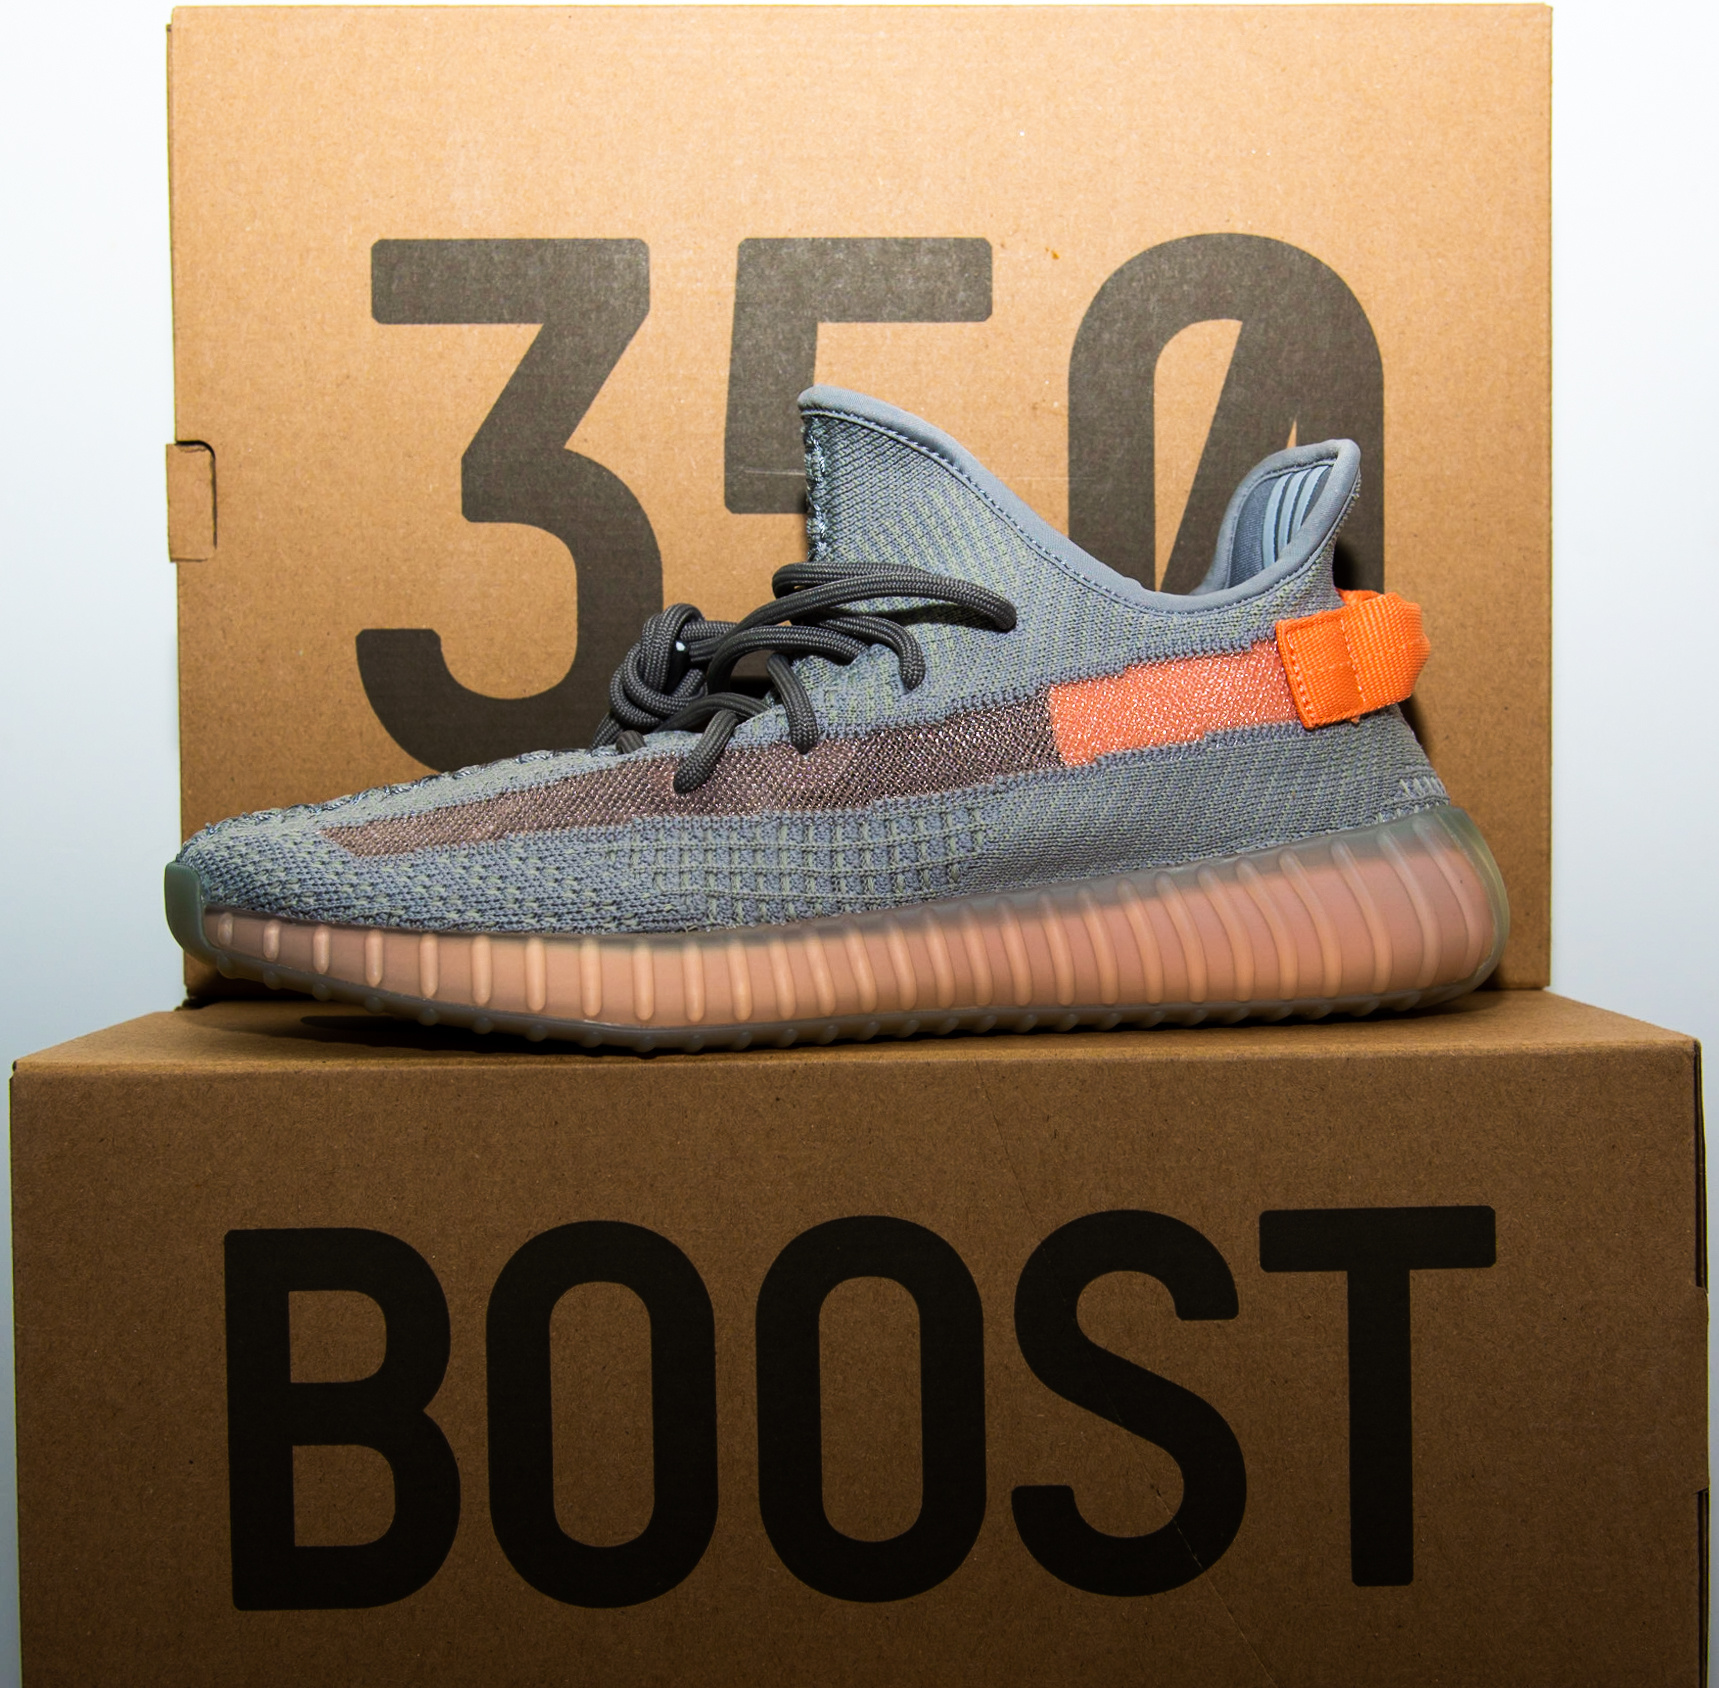 Yeezy Boost 350 V2 TrFrm